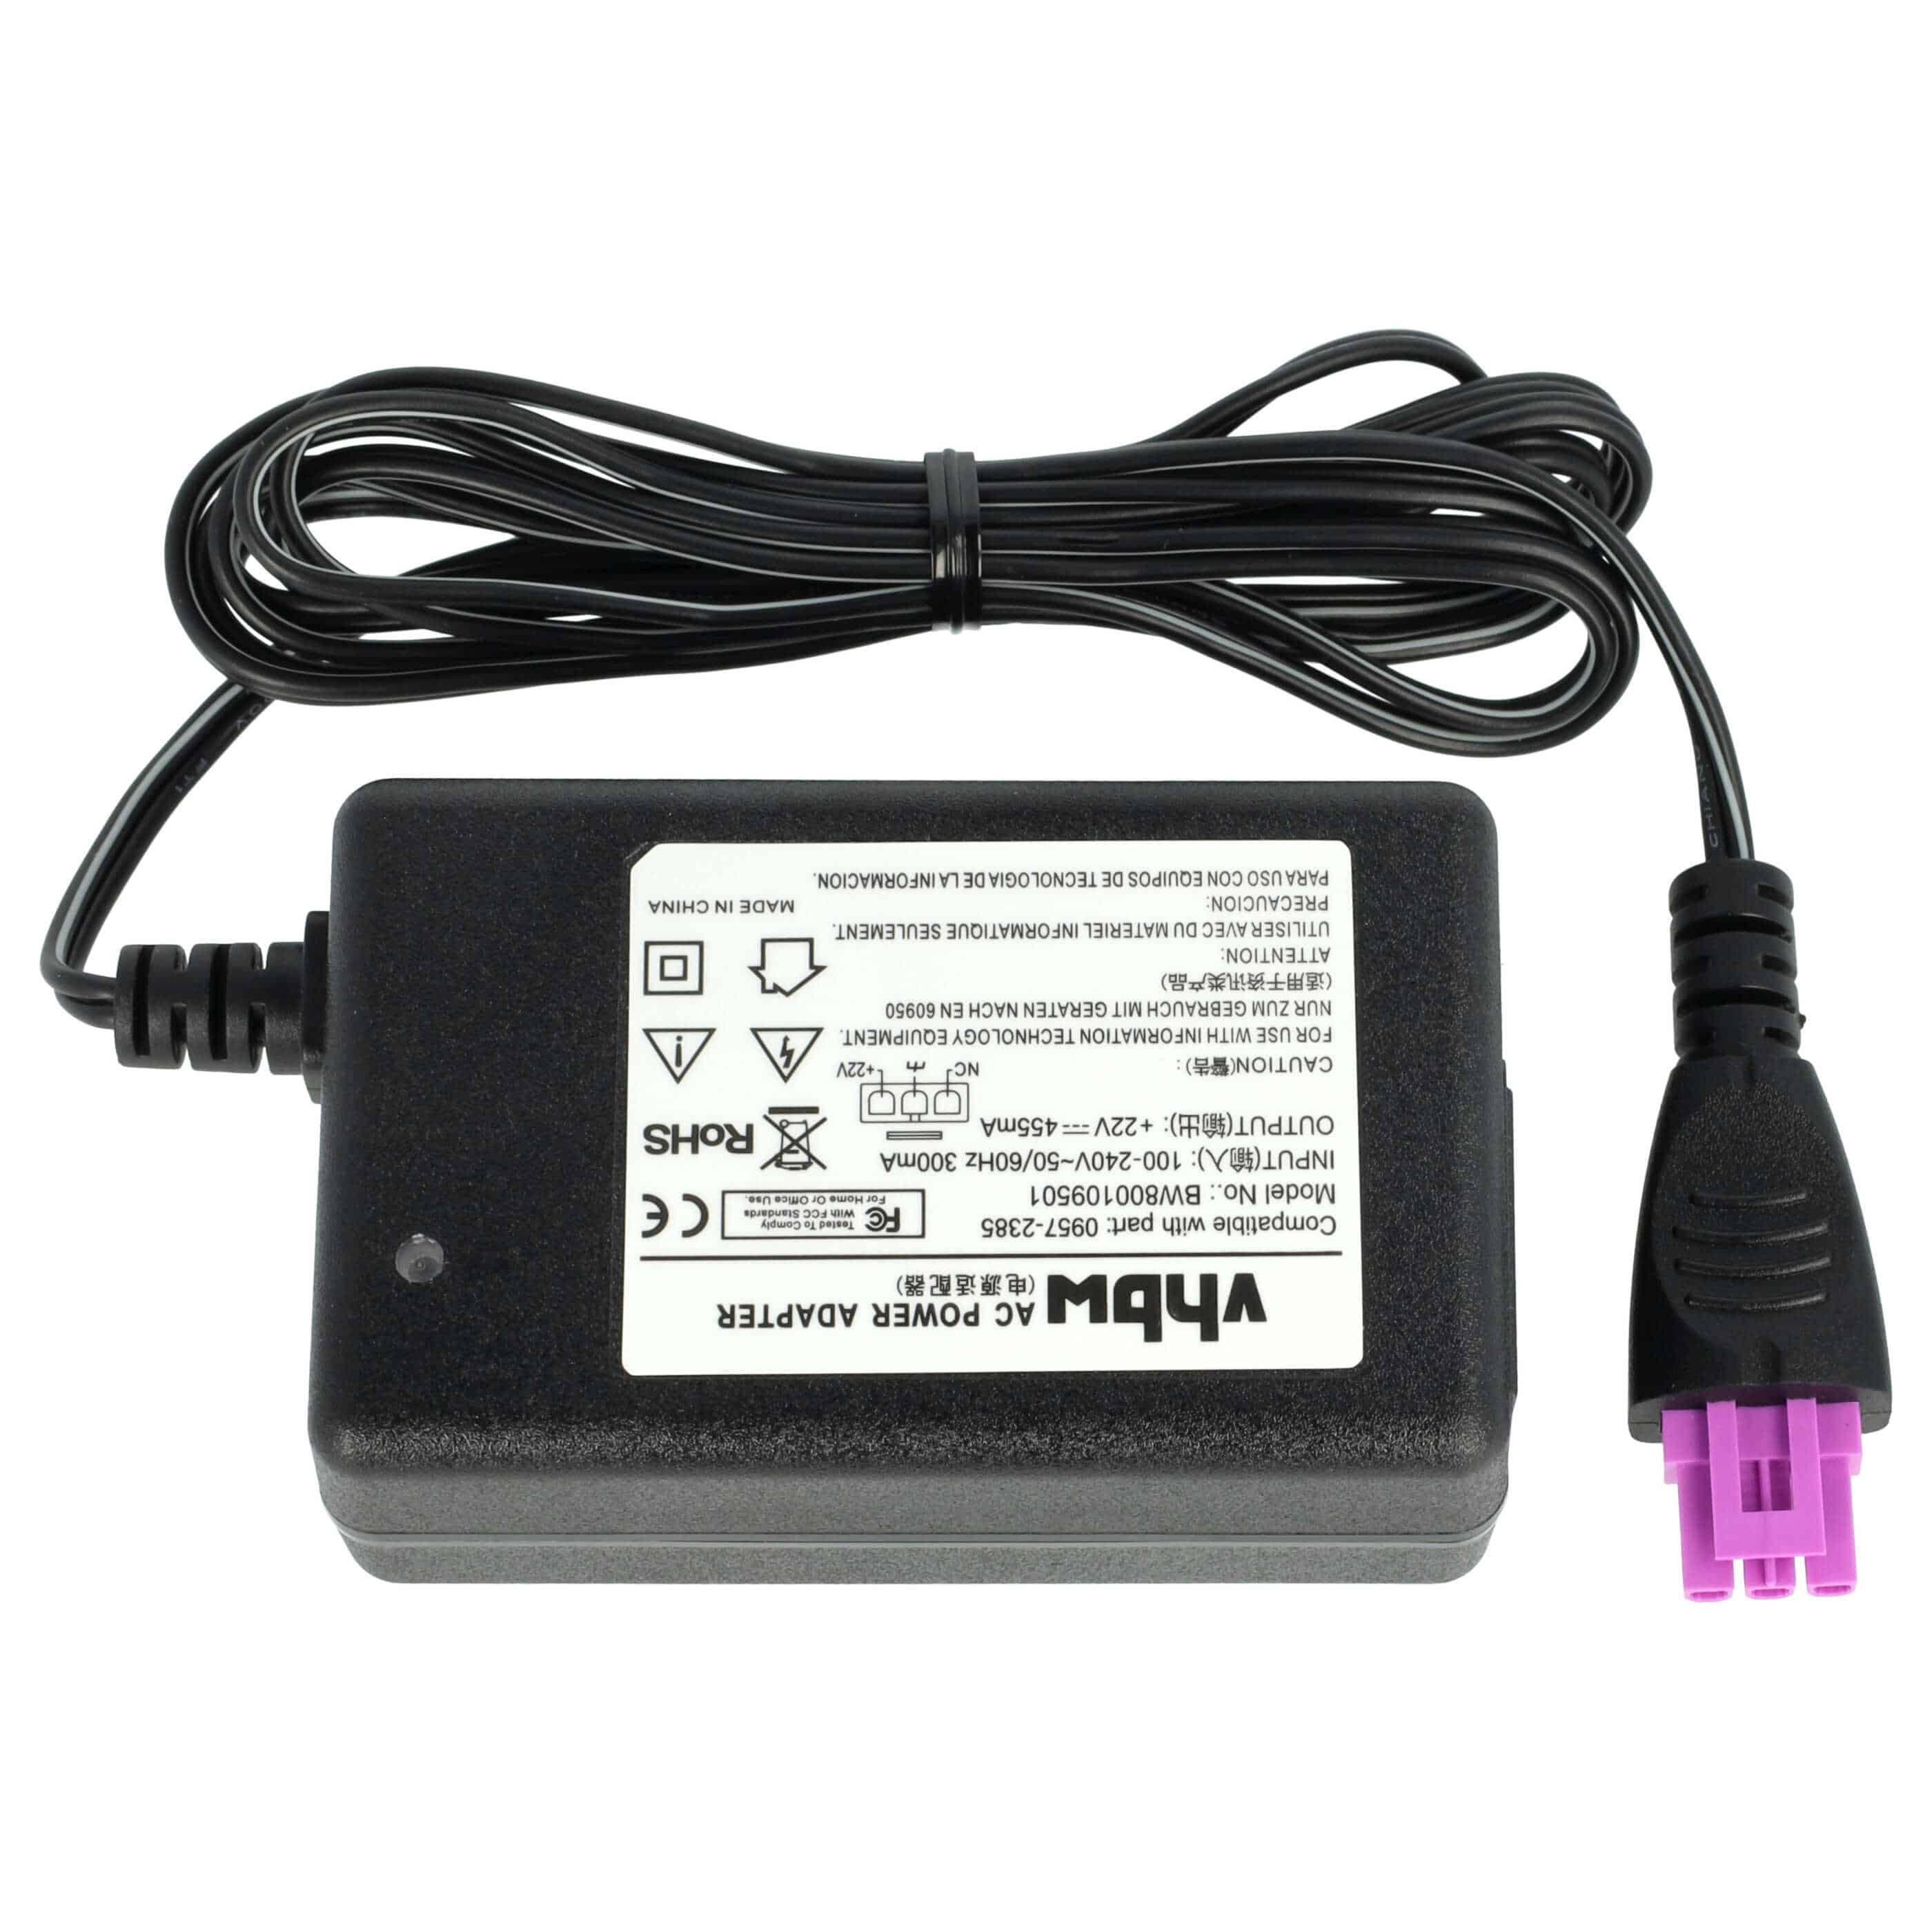 Mains Power Adapter replaces HP 0957-2403, 0957-2385 for Printer - 200 cm